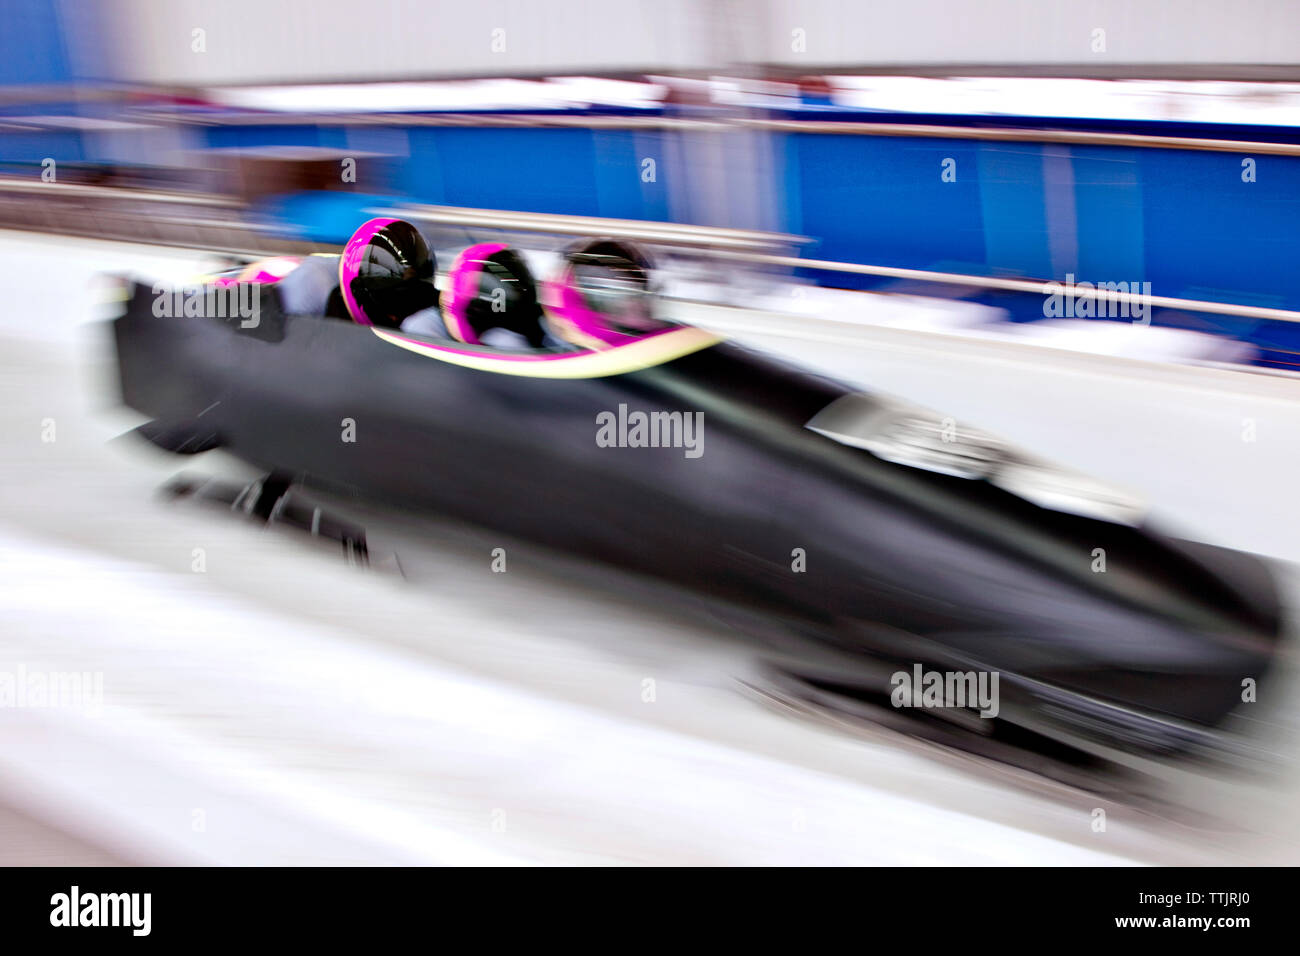 Blurred motion of no bobsleigh team on track Stock Photo